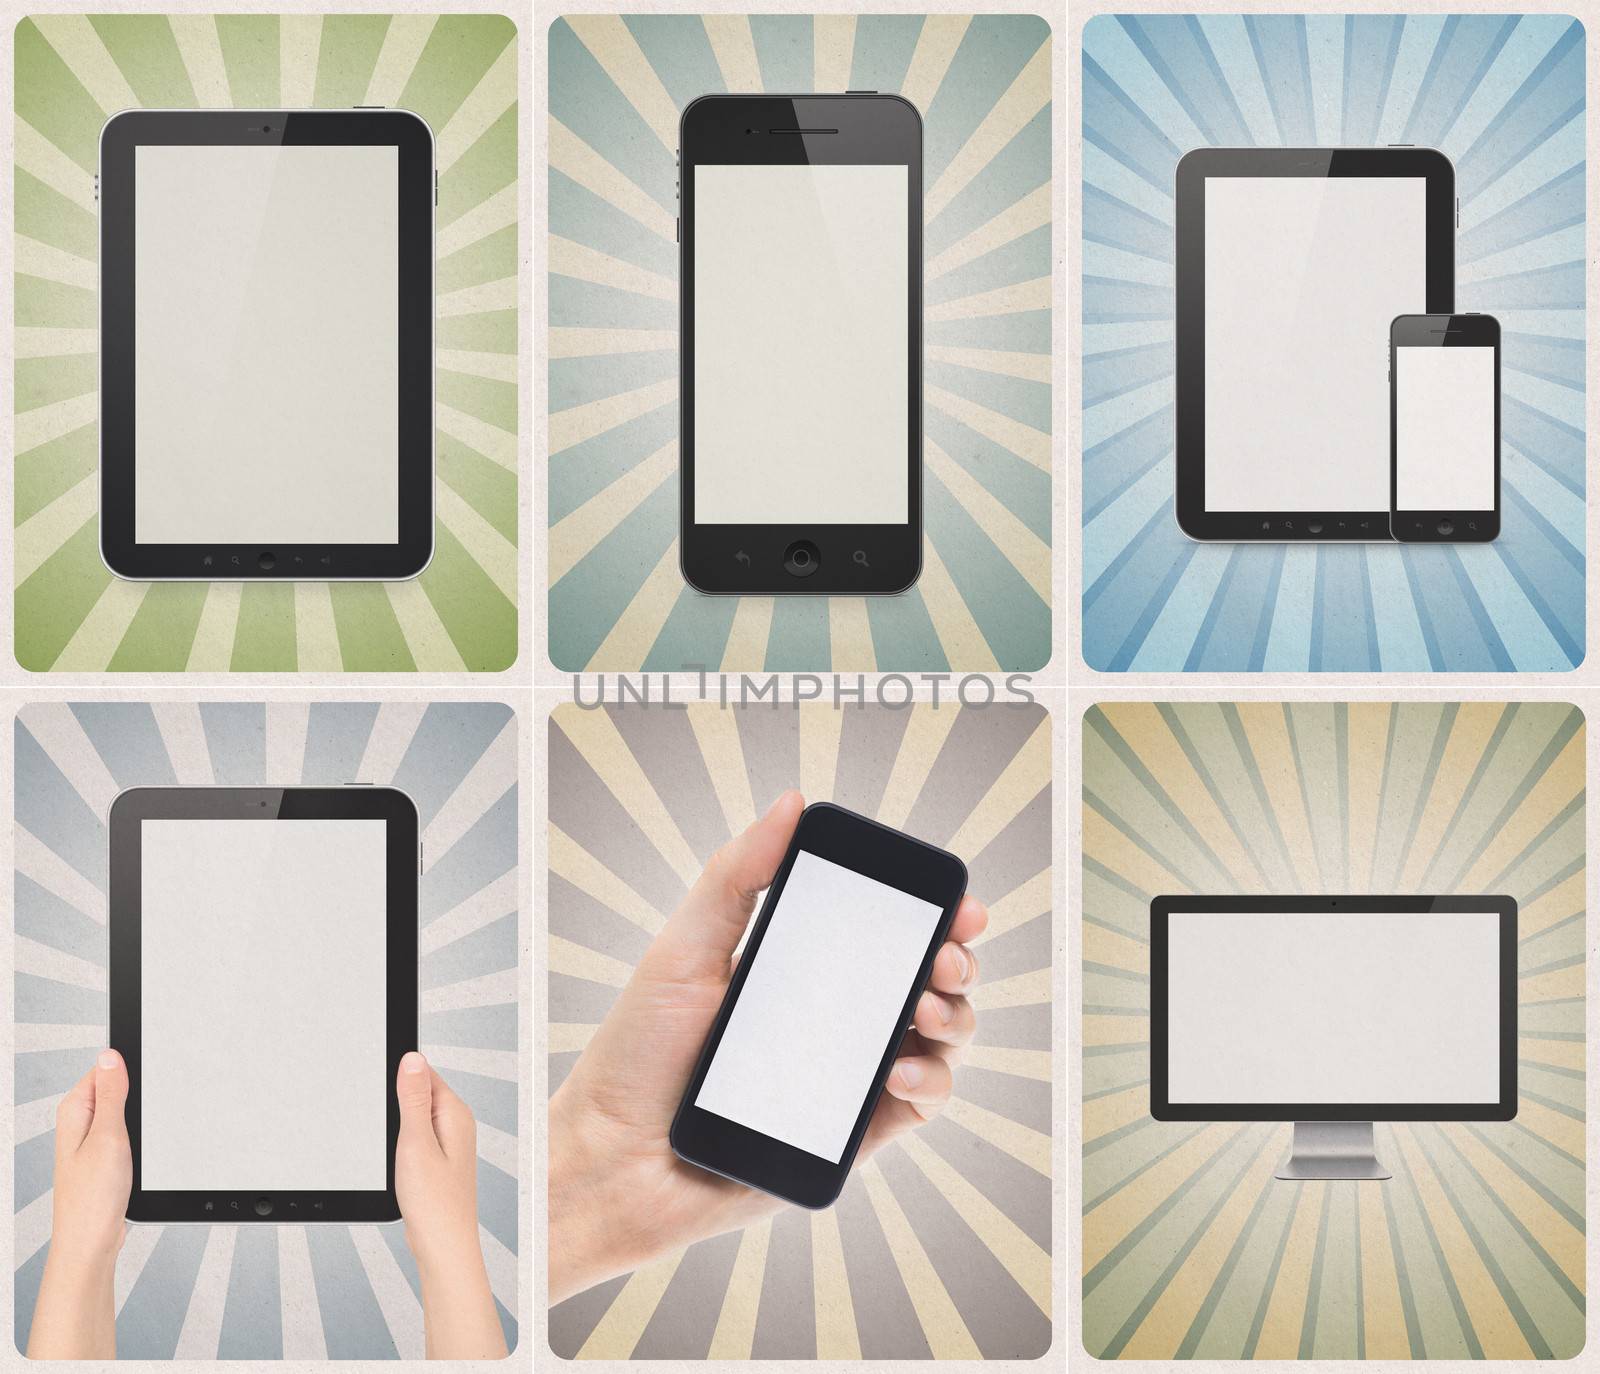 Set of six retro style posters or vintage advertisements with blank modern digital devices, such as smartphone, digital tablet, modern computer monitor on a different grunge paper background texture with sunbeam stripes.